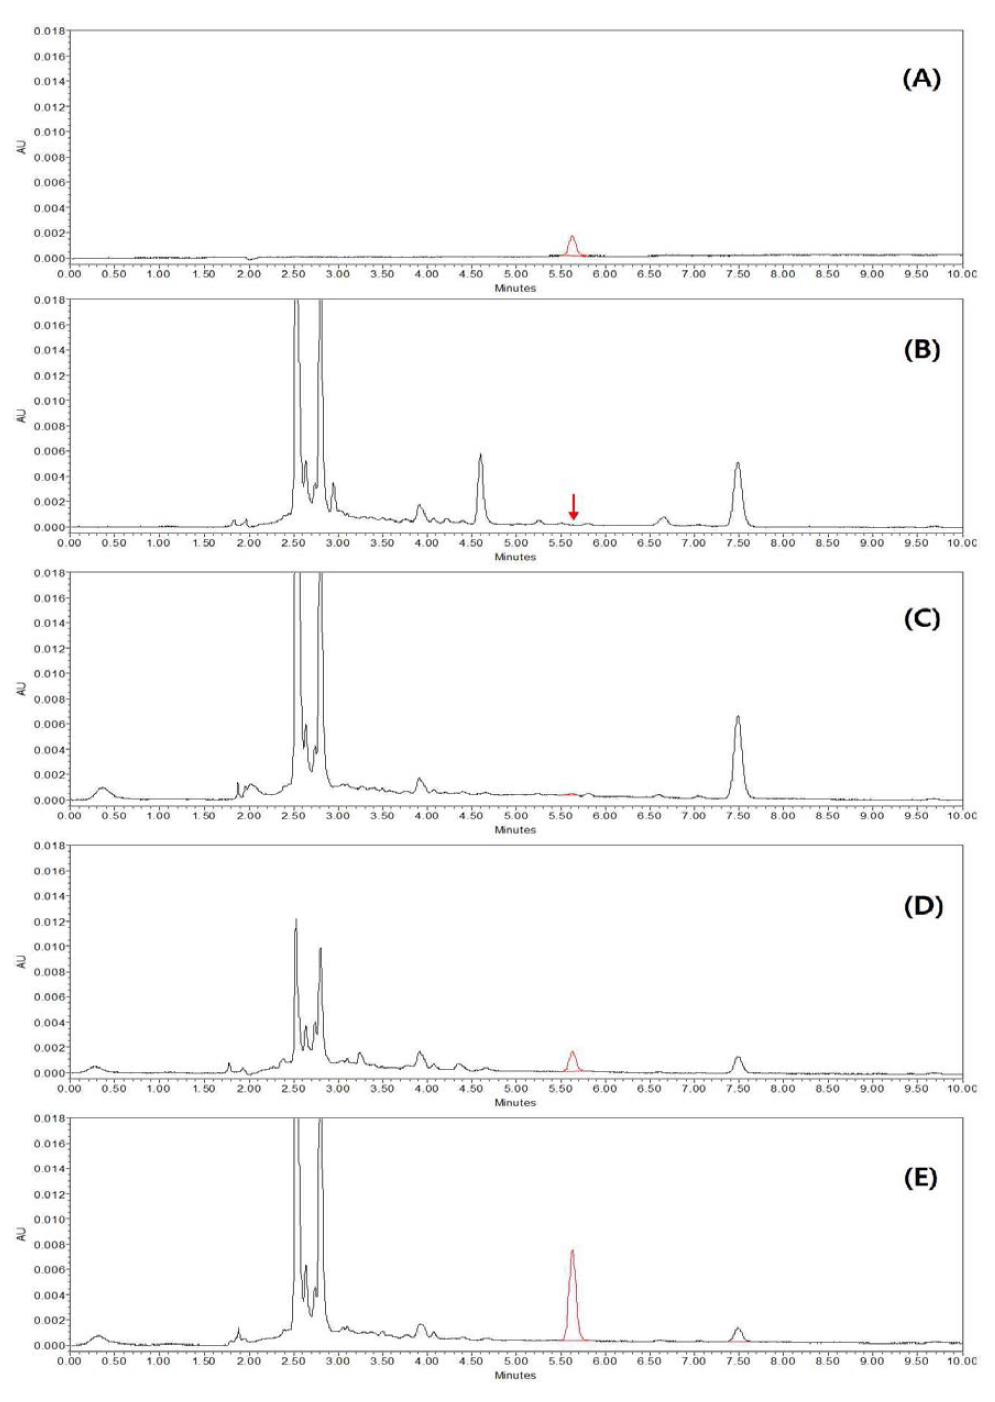 HPLC-UV chromatograms corresponding to: A, standard solution at 0.1 mg/kg; B, control soybean; C, spiked at 0.01 mg/kg; D, spiked at 0.1 mg/kg; and E, spiked at 0.5 mg/kg